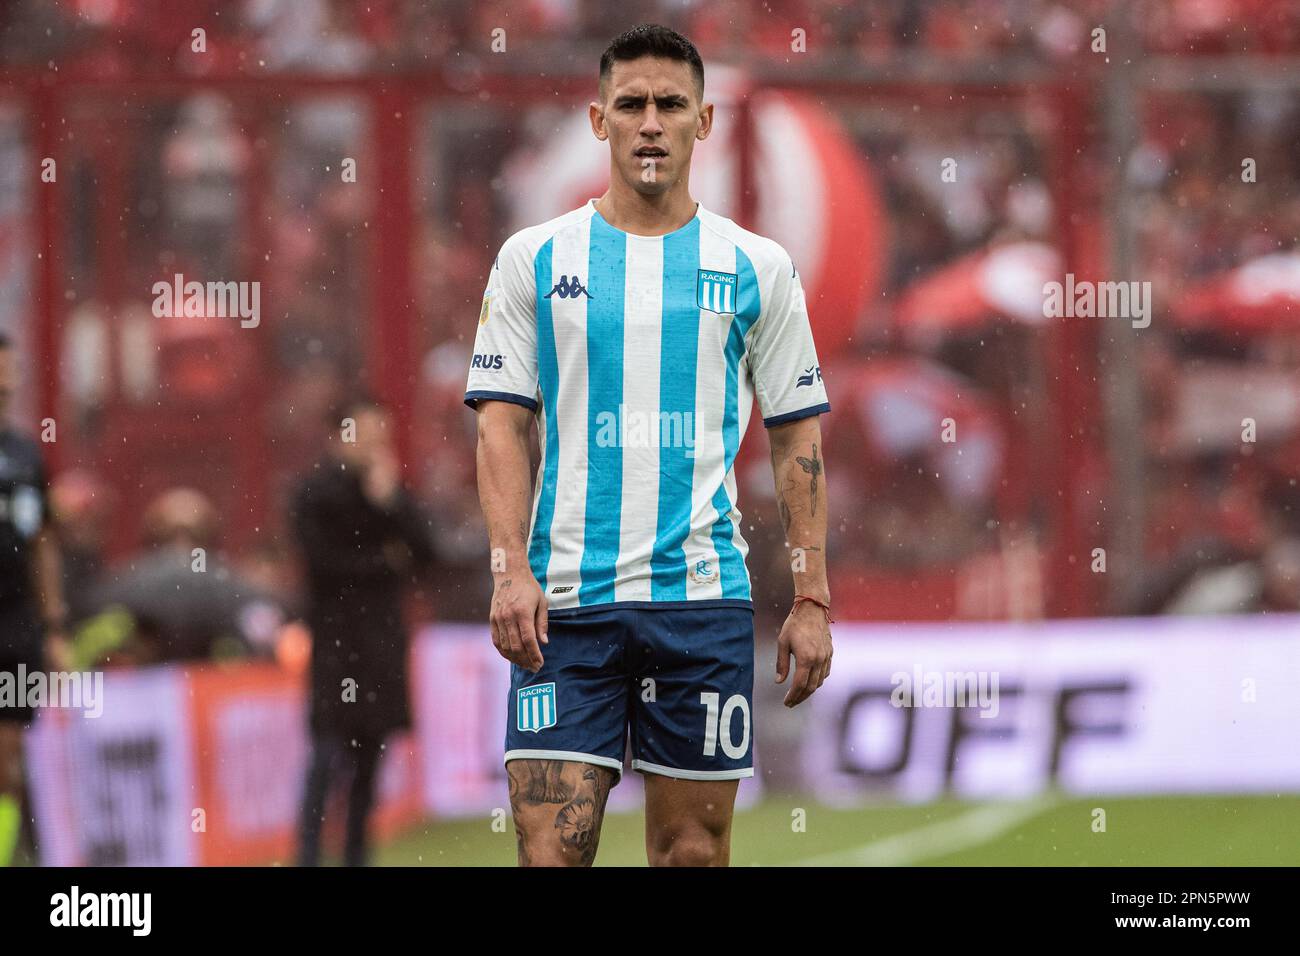 Avellaneda, Argentina, 12, March, 2023. Racing Club Fans during the Match  between Racing Club Vs. Club Atletico Sarmiento Editorial Stock Photo -  Image of liga, racing: 271804368